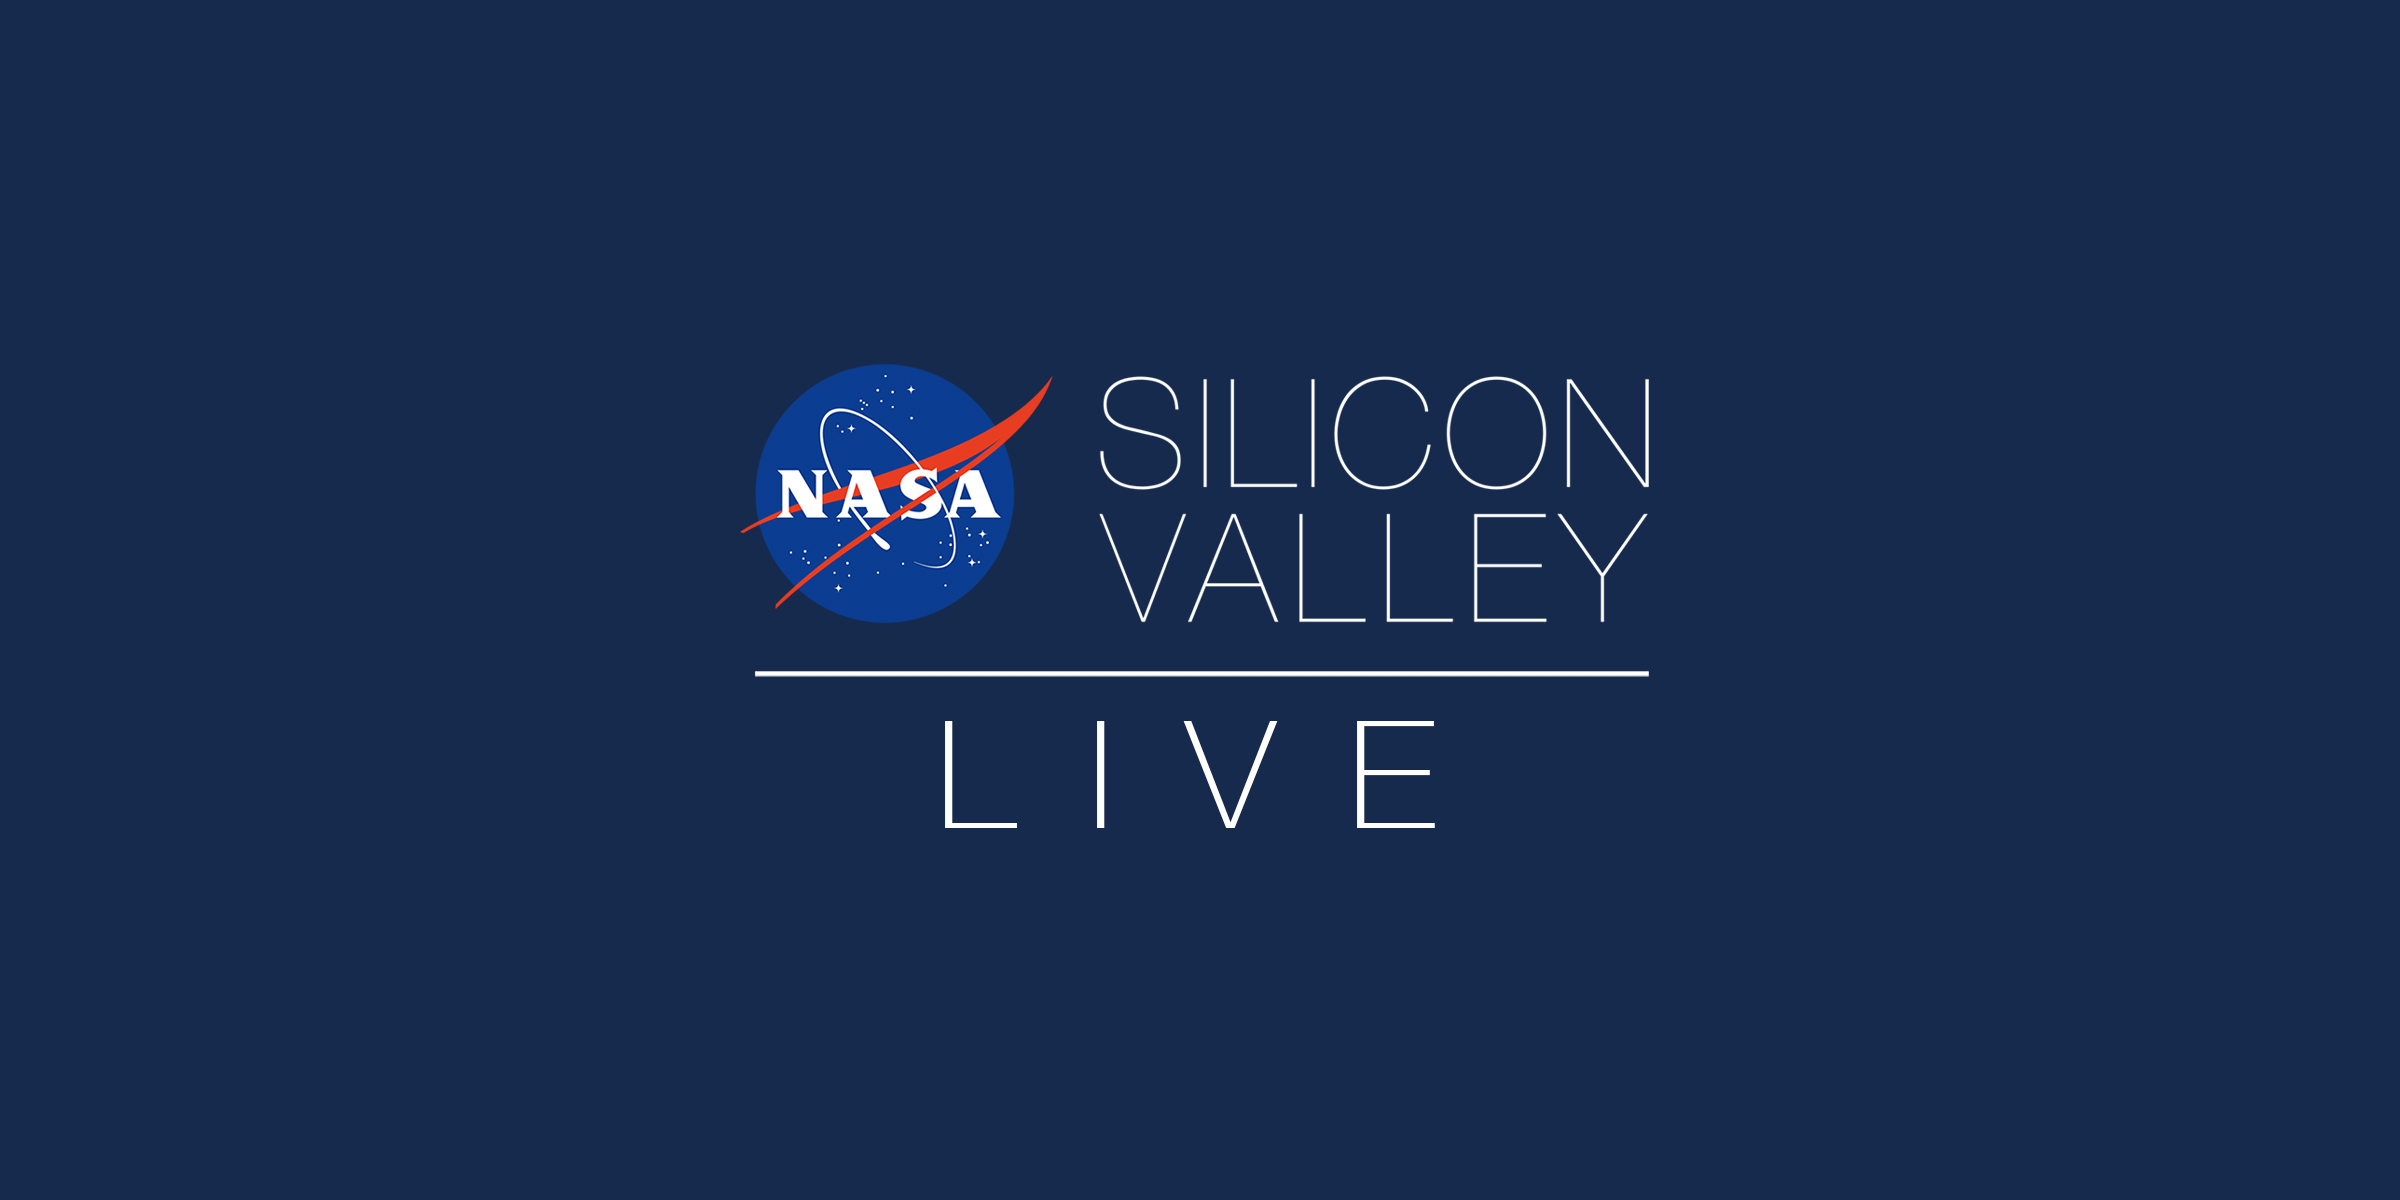 NASA in Silicon Valley Live – Is There Life on Mars?